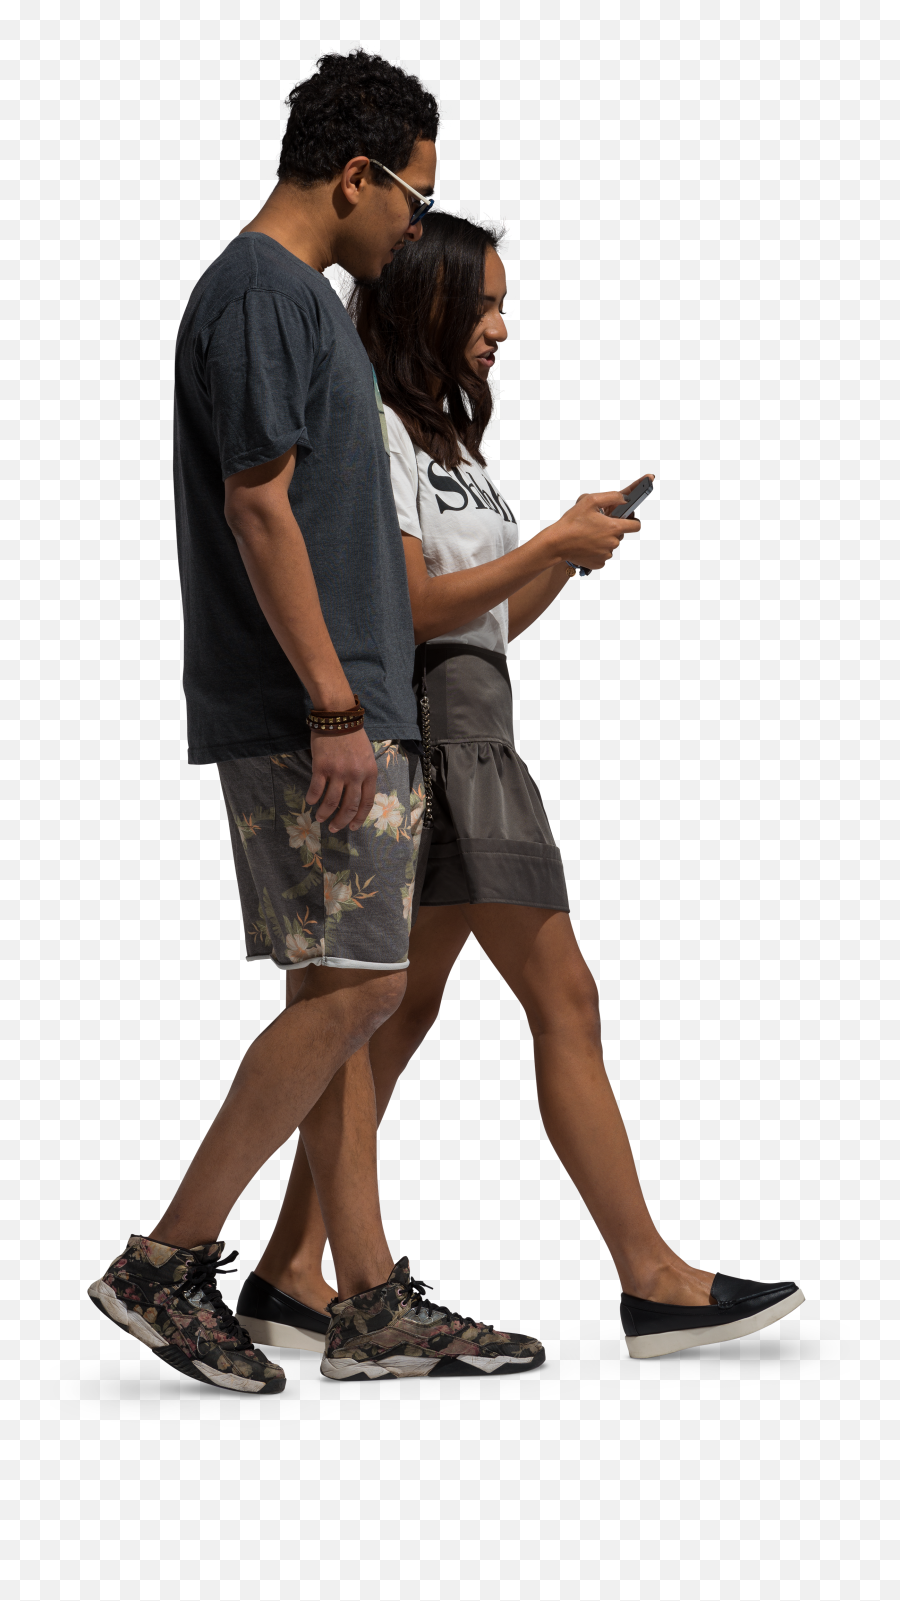 Cut Out People - Free Cutout People Photos People Cut Out Png,Cut Png